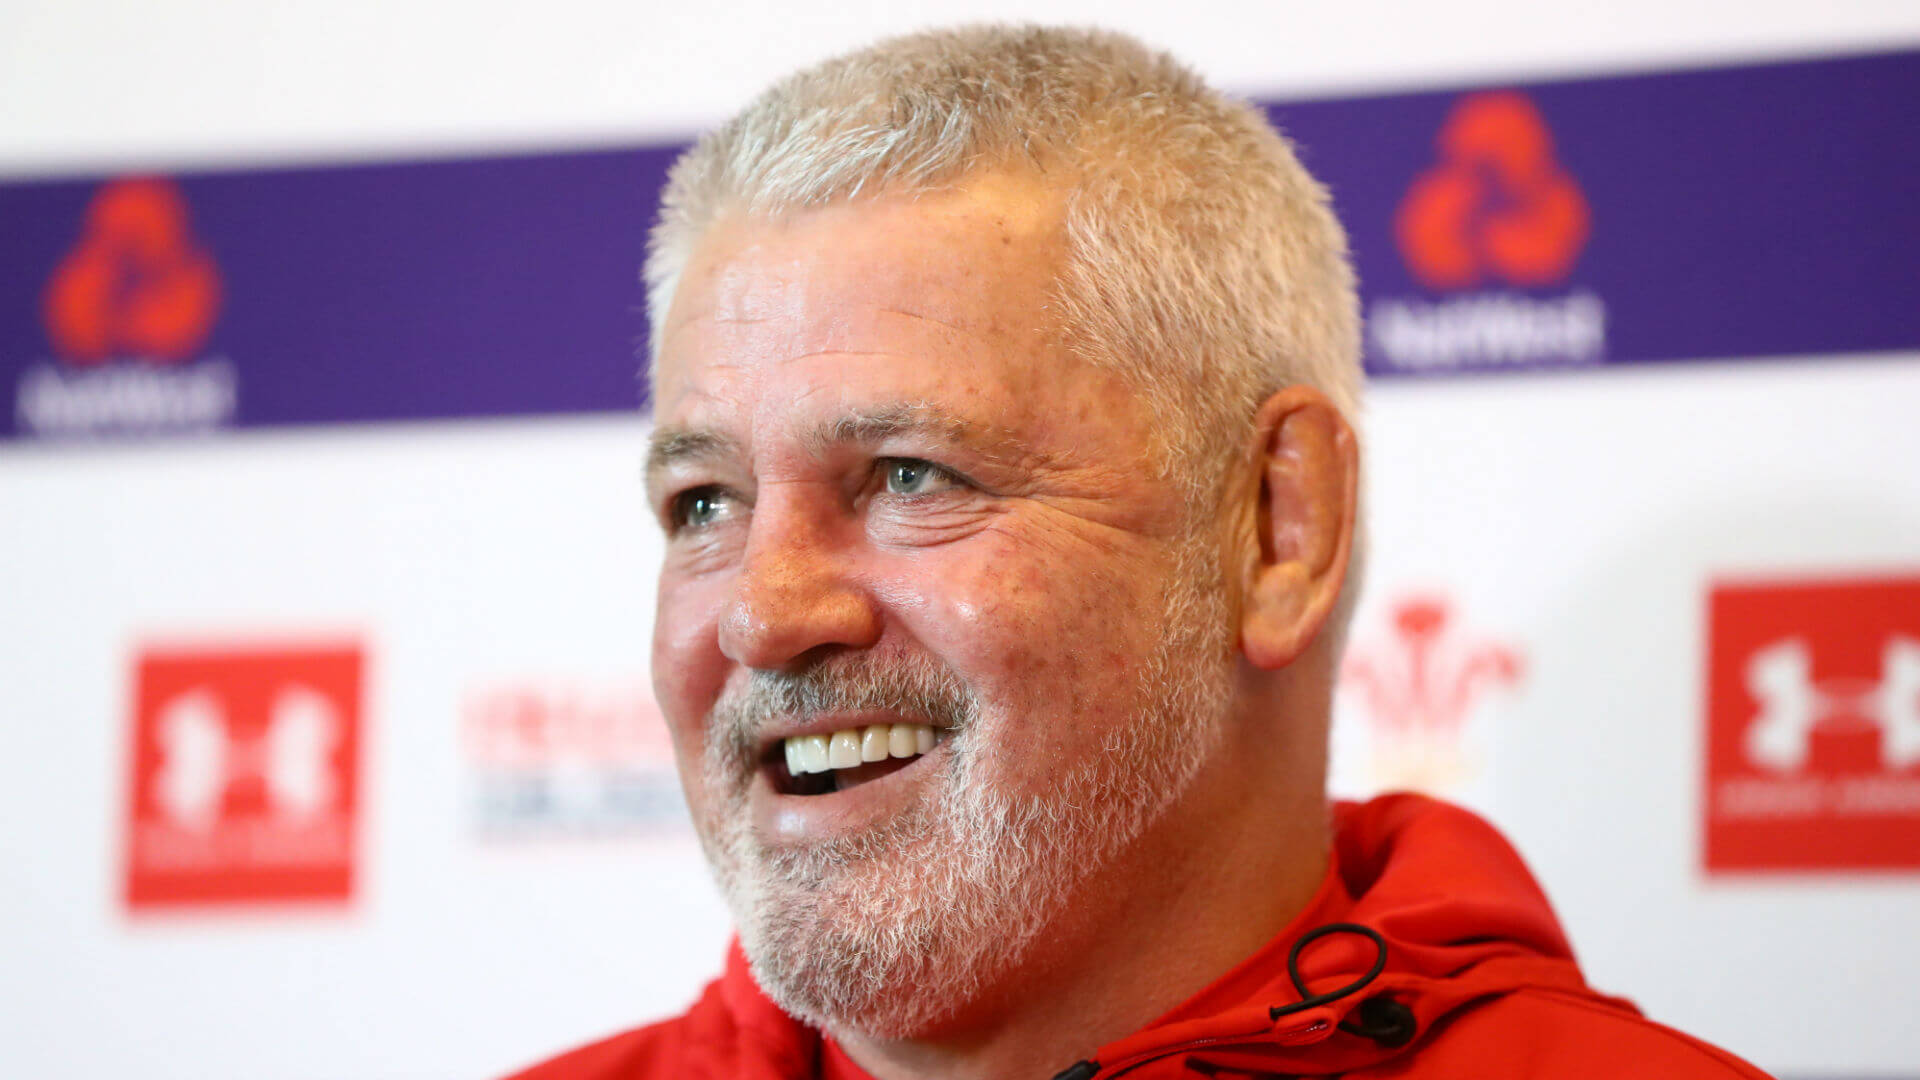 two-grand-slams-and-2-253-points-scored-gatland-s-100-wales-matches